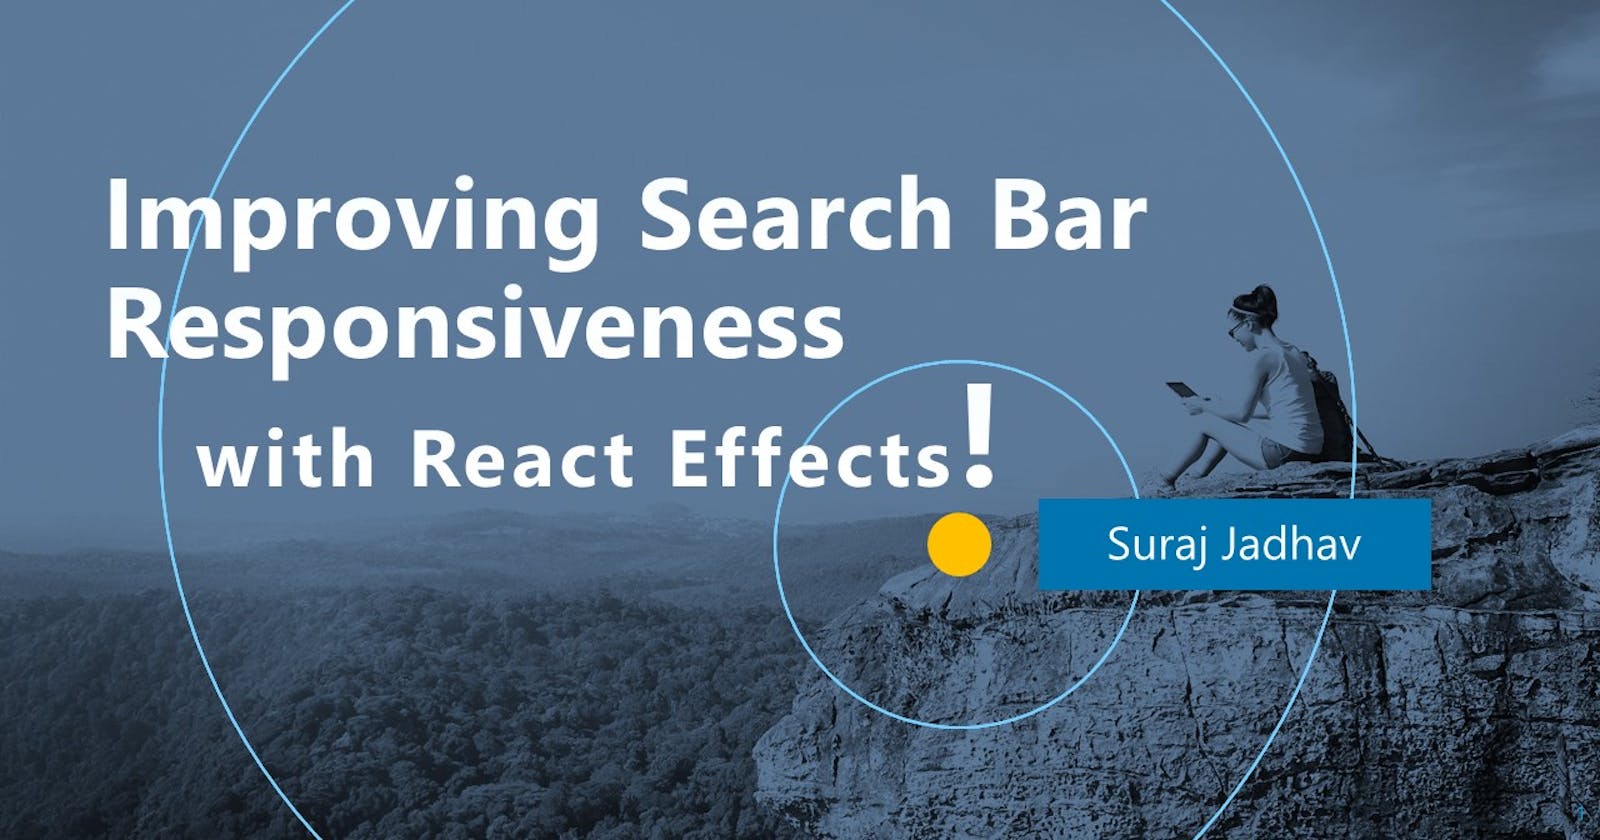 Improving Search Bar Responsiveness with React Effects